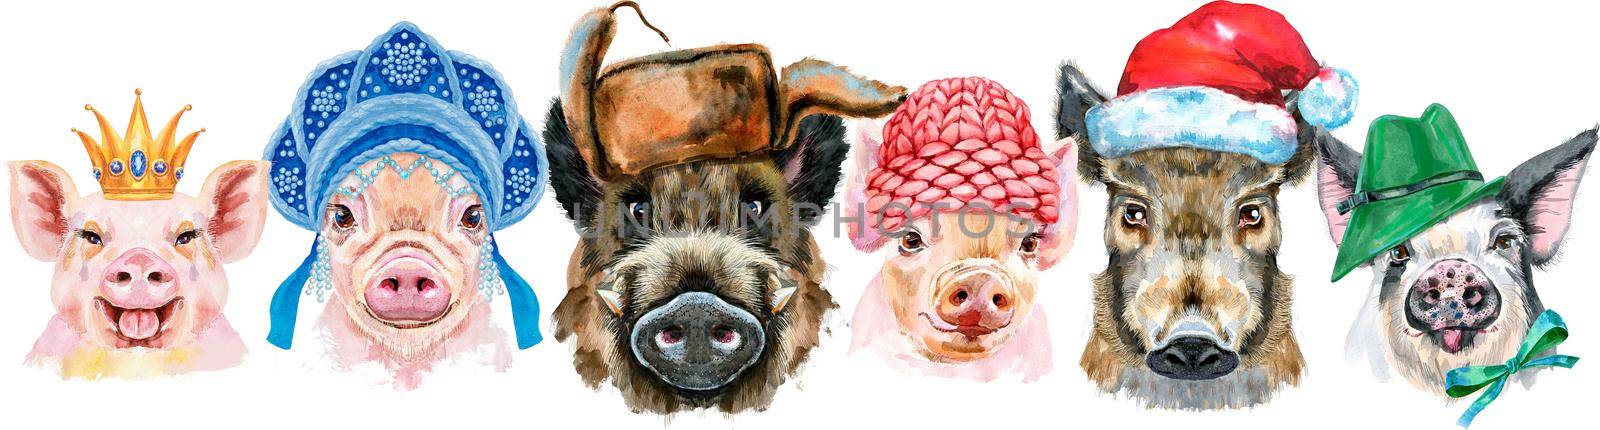 Cute border from watercolor portraits of pigs. Watercolor illustration of pigs in Santa hat, Russian kokoshnik, green hat, pink winter hat and gold crown